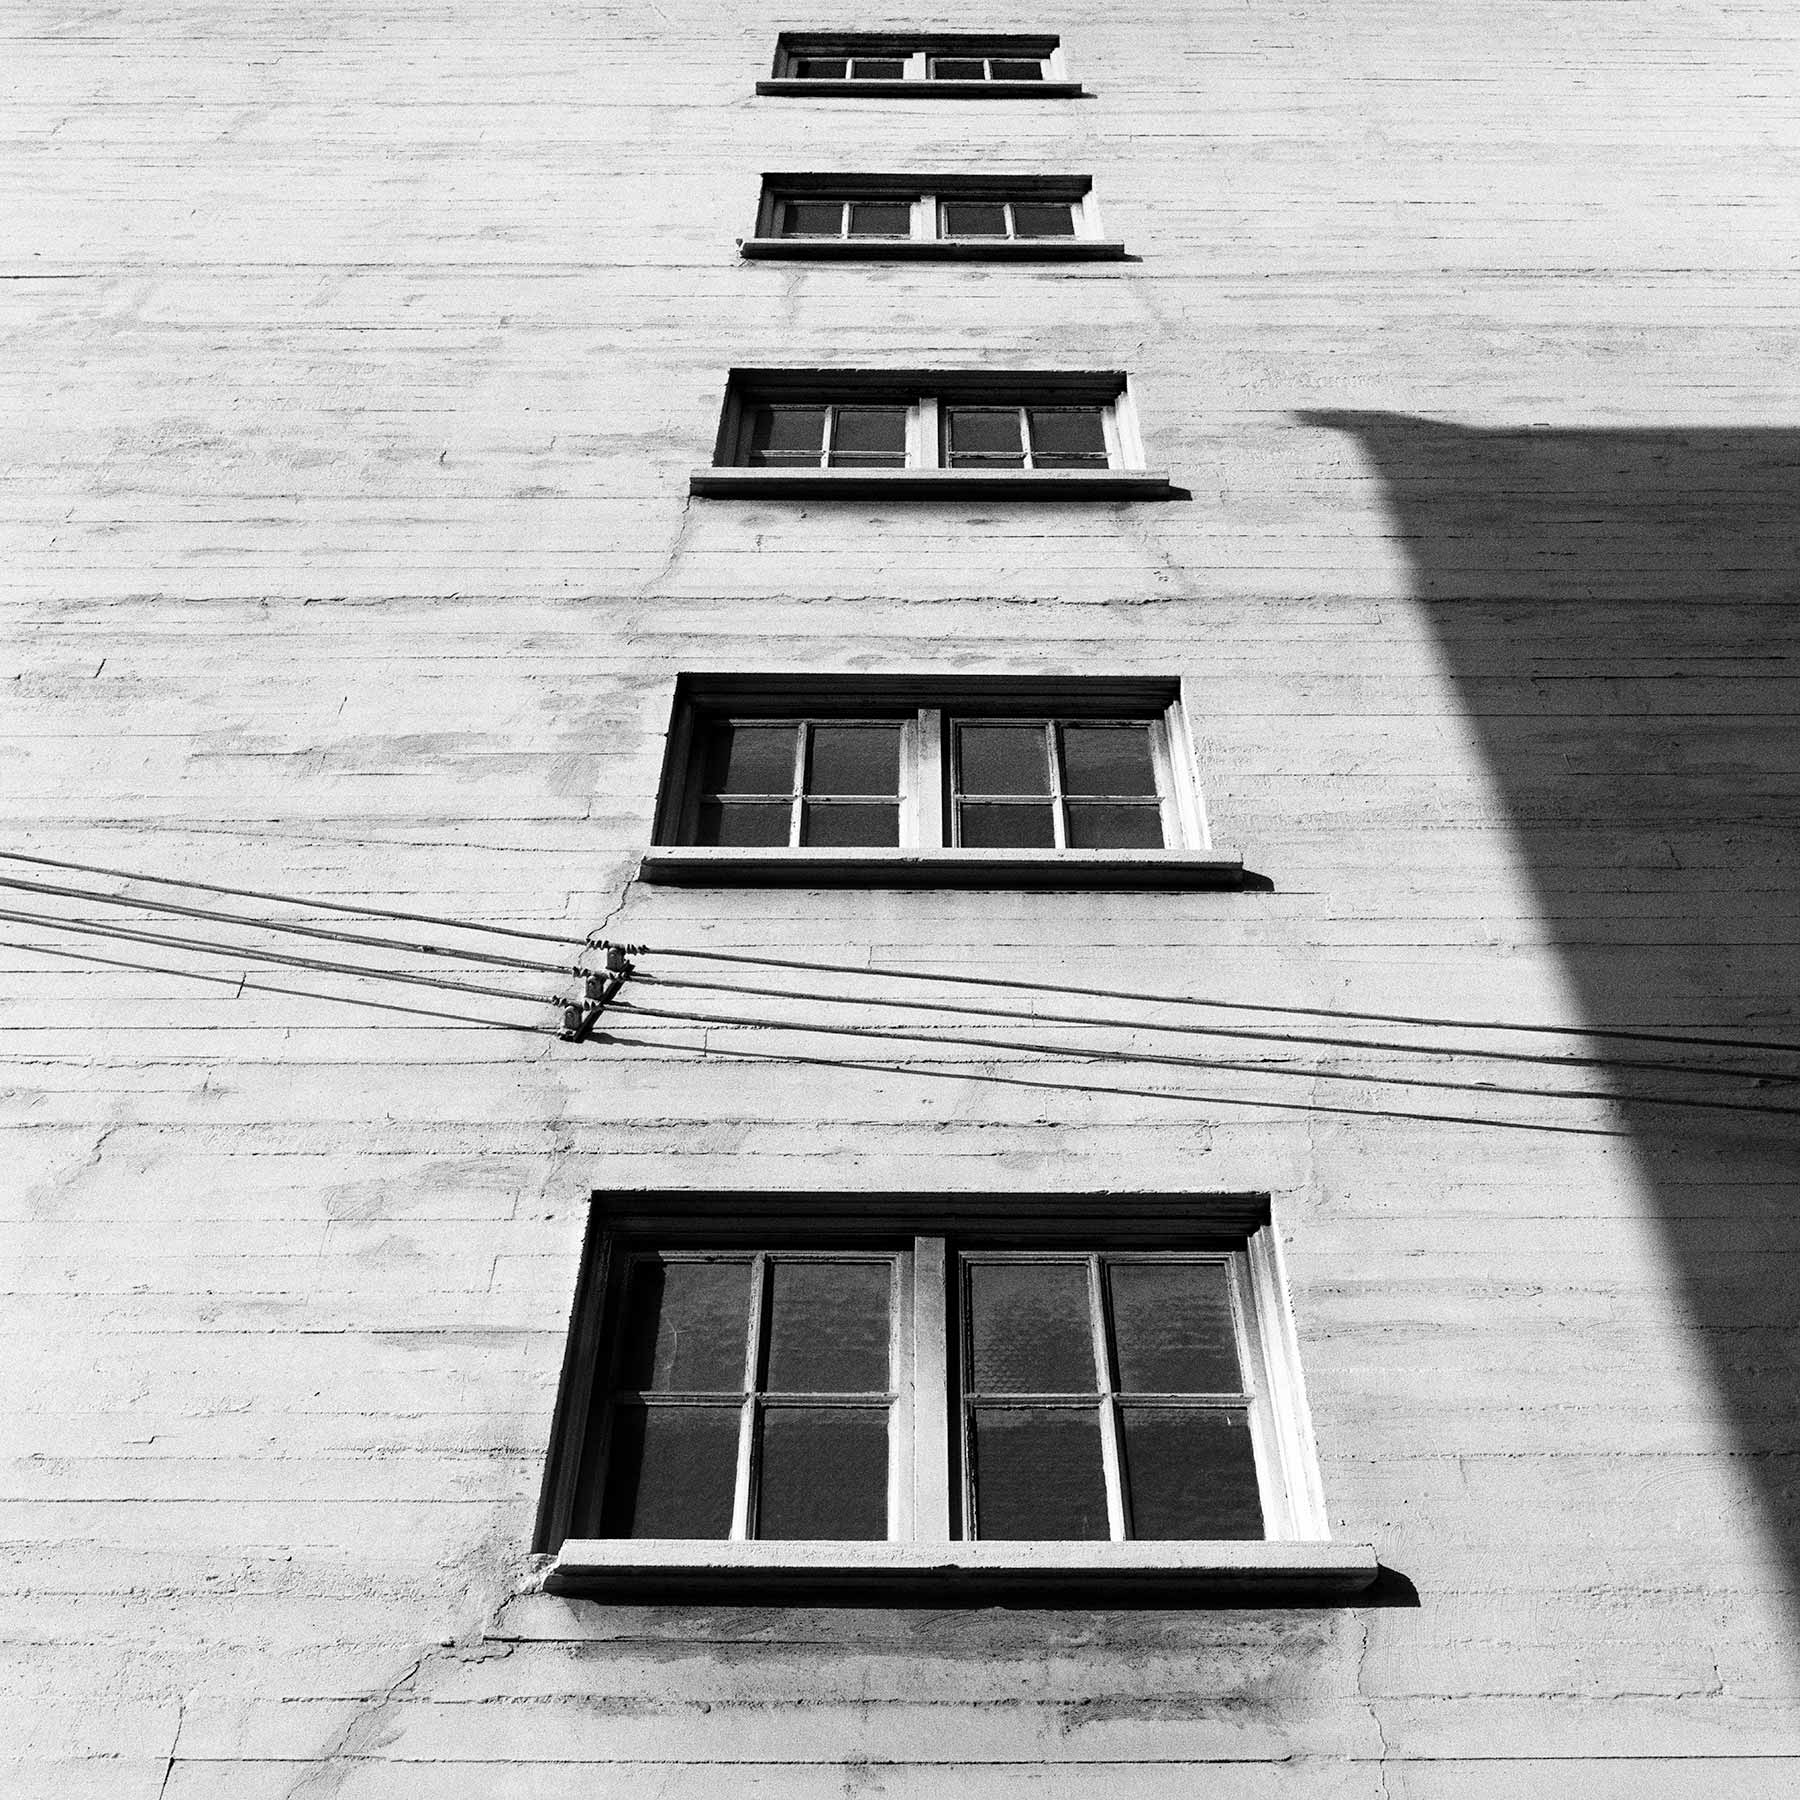 Windows and electric line – Arts District, Los Angeles, California, 1983